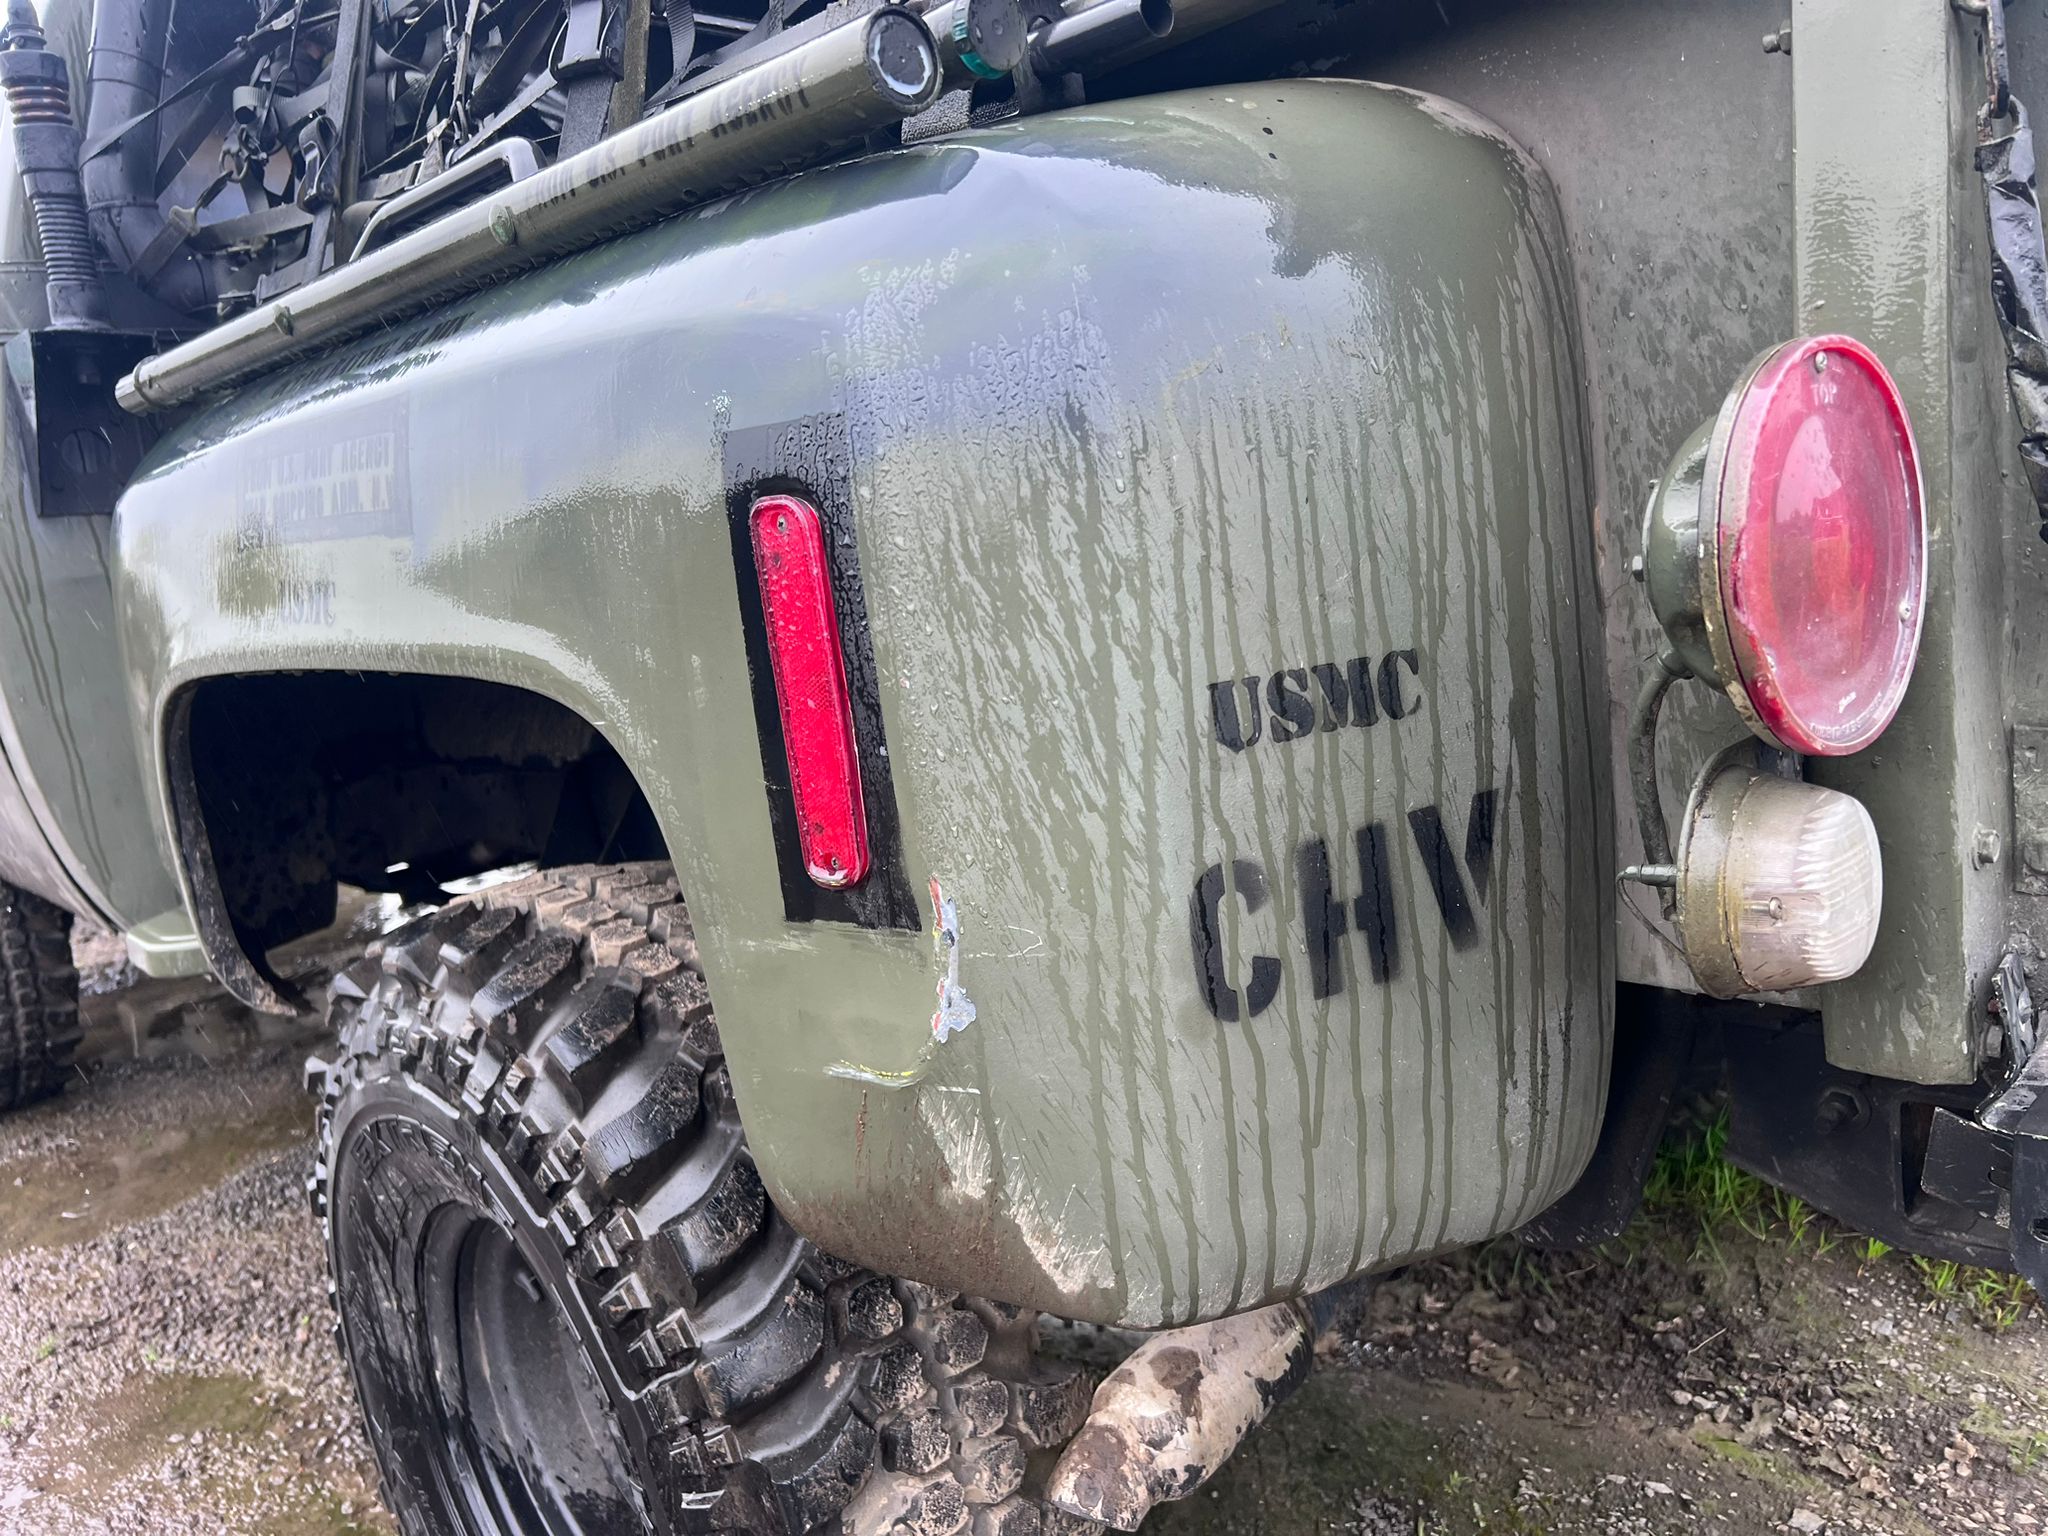 1975 Chevrolet C10 Cheyenne Military Pickup. ULEZ & Congestion Charge Exempt. - Image 7 of 20